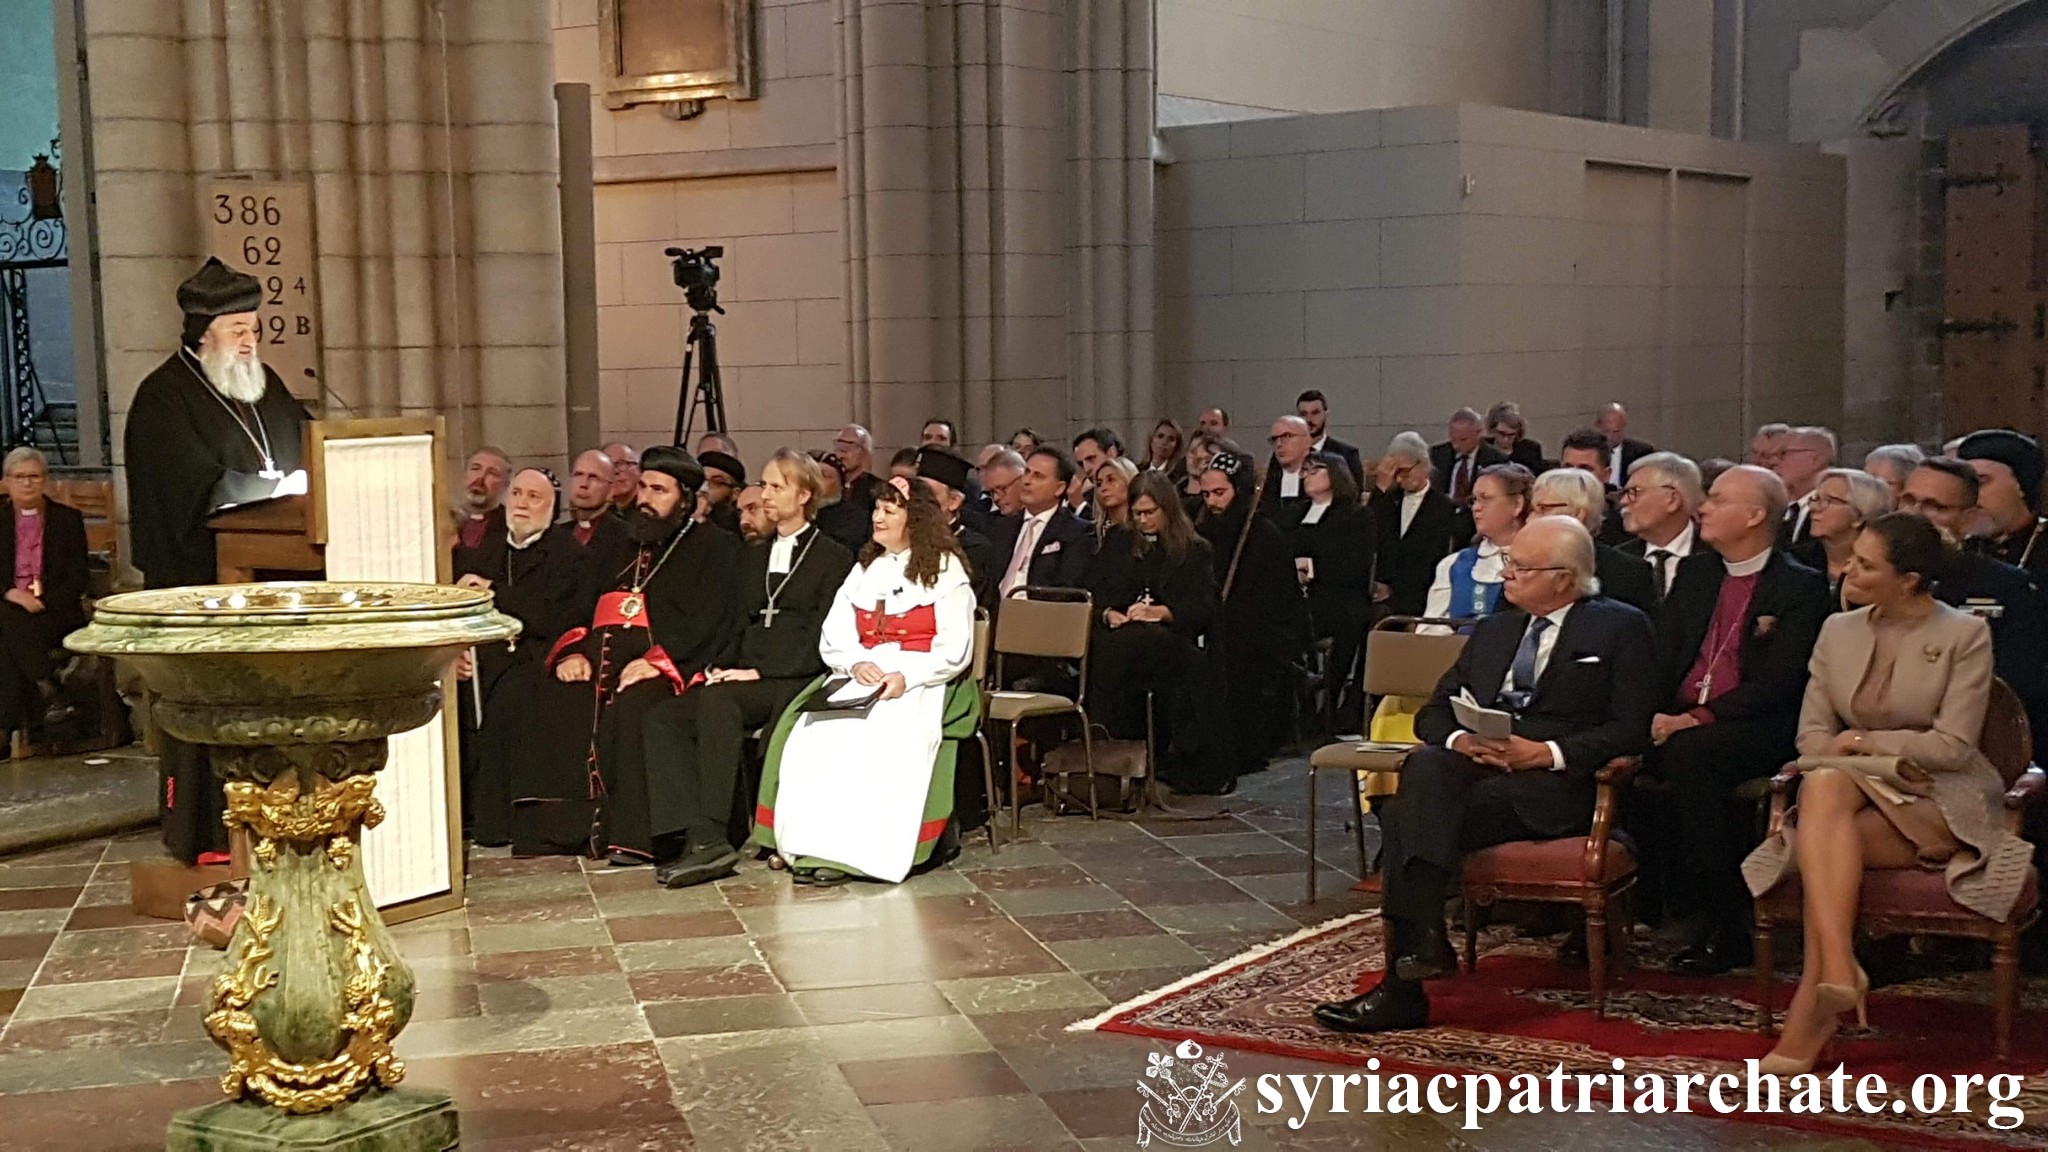 Speech by Patriarch Ignatius Aphrem II at the Opening of the General Synod of the Church of Sweden